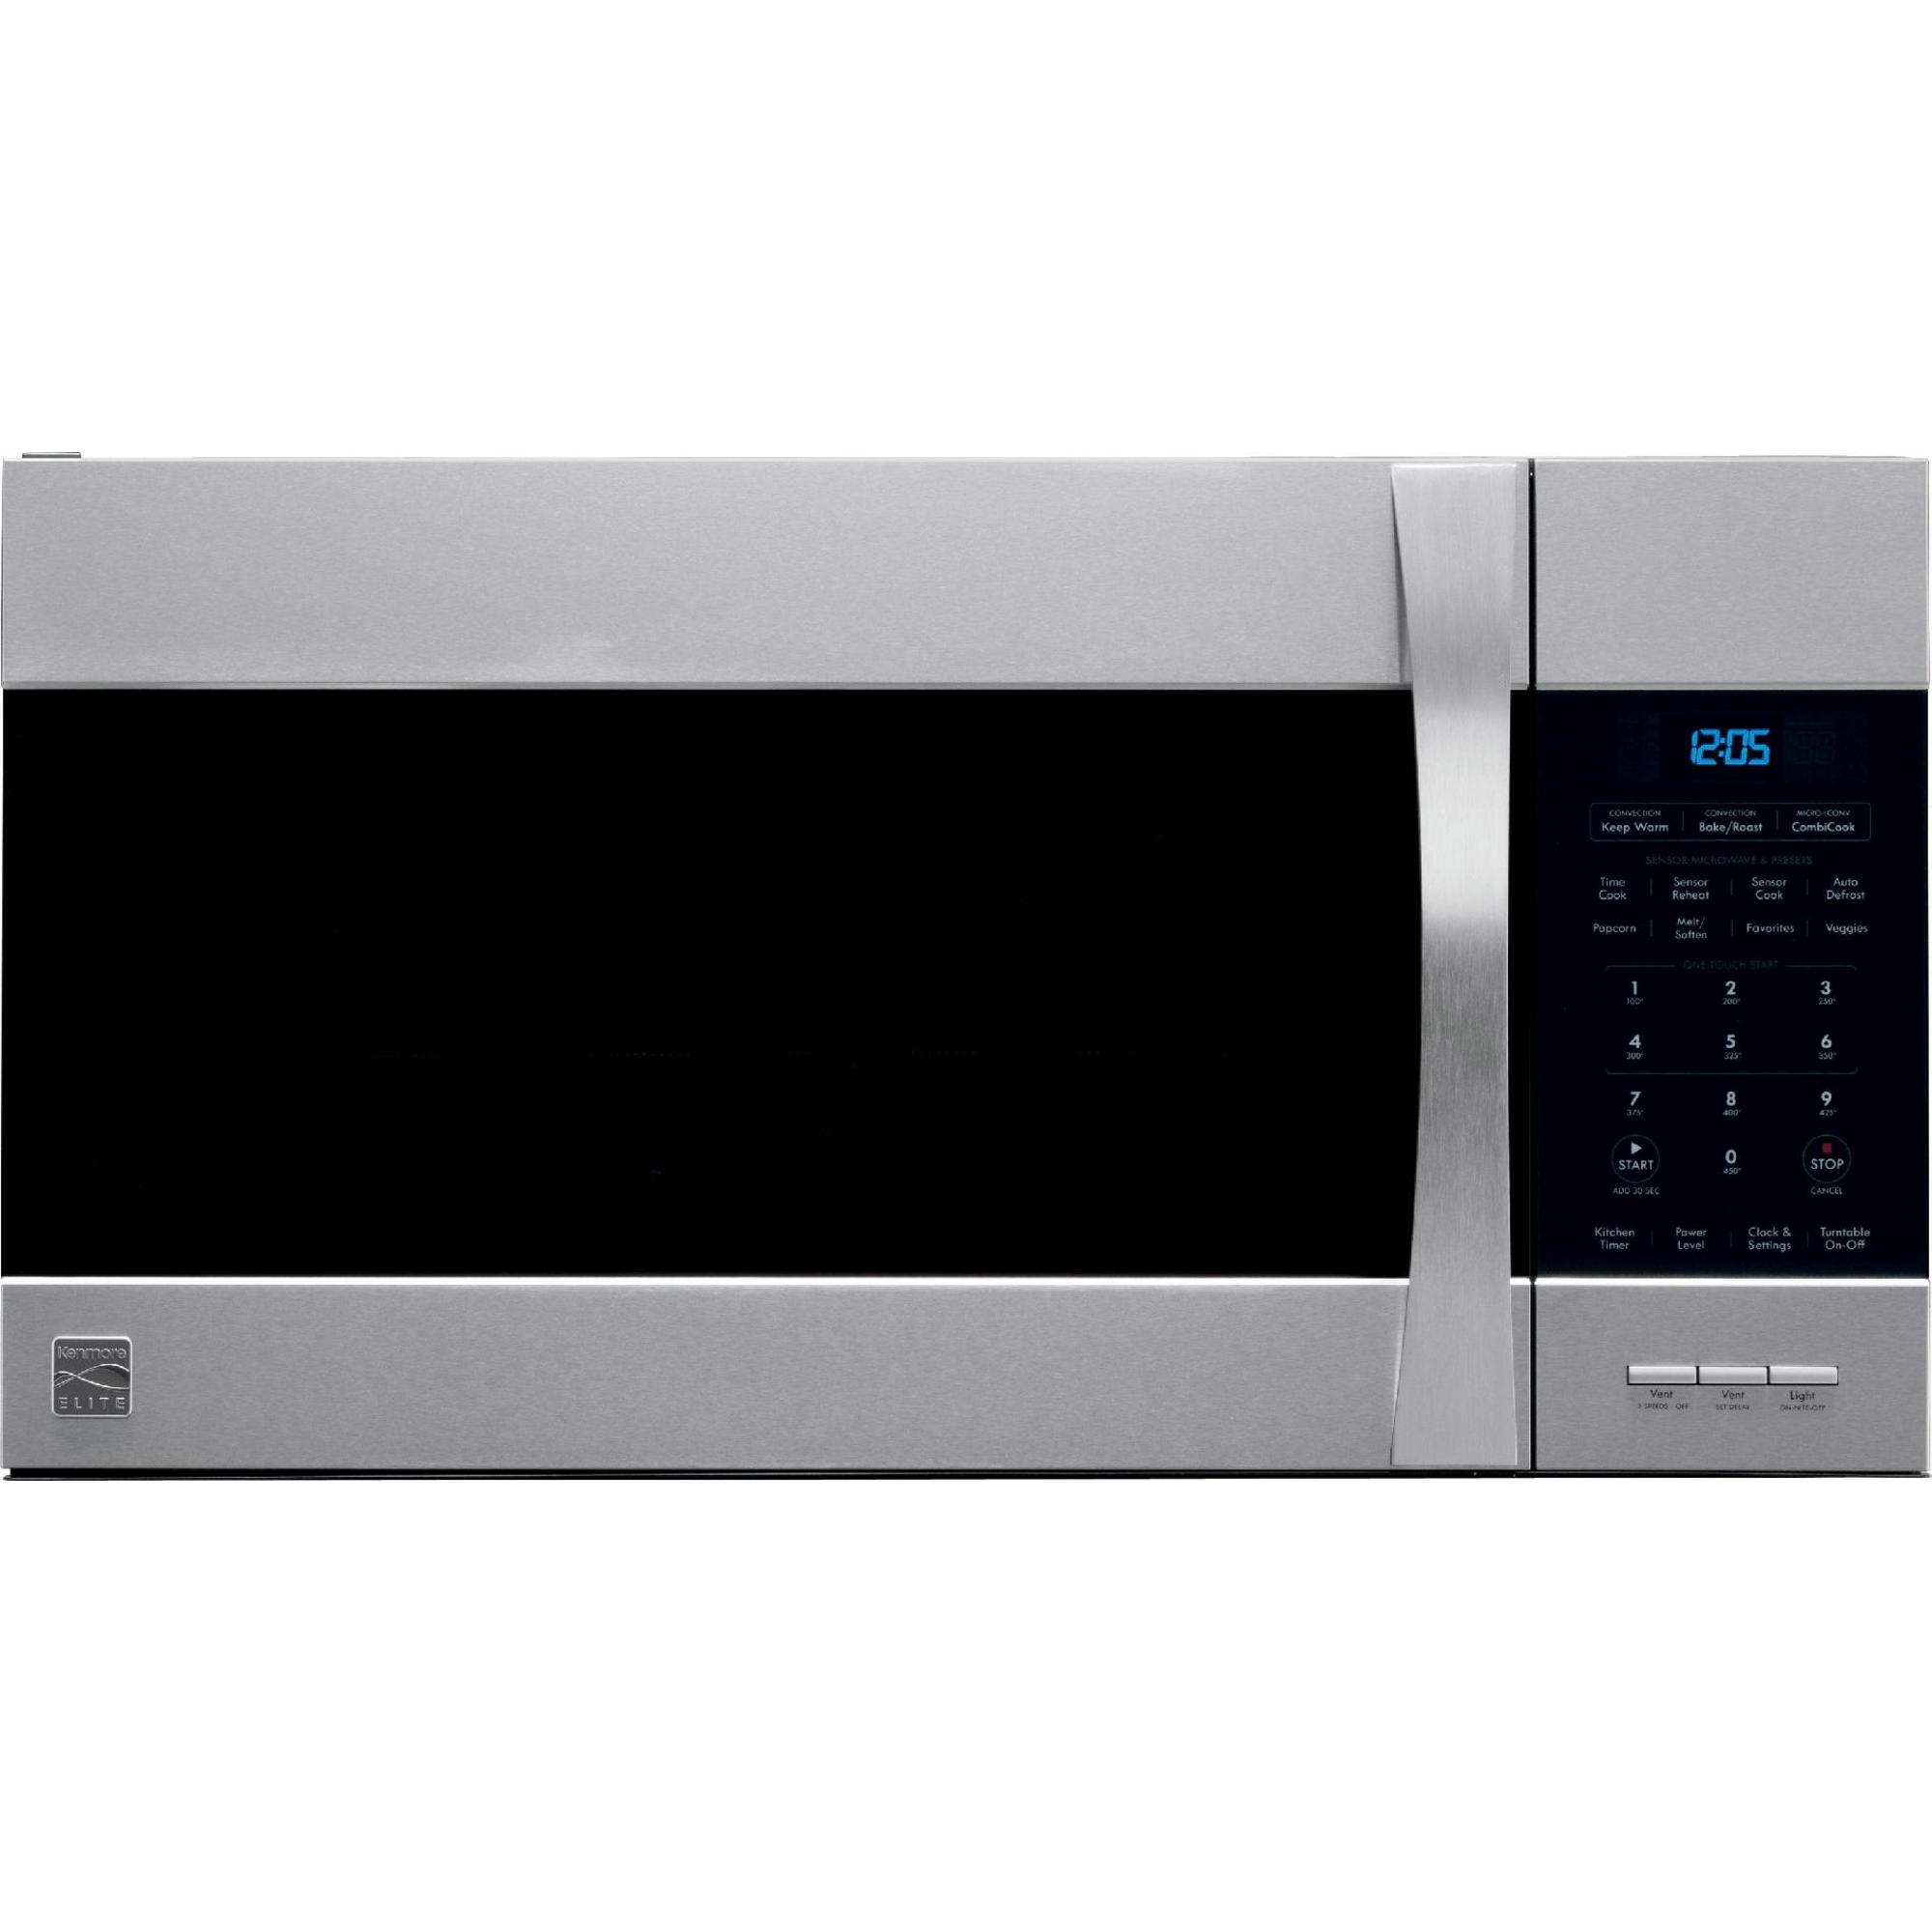 Kenmore Elite 80363 1.5 cu. ft. Over-the-Range Convection Microwave